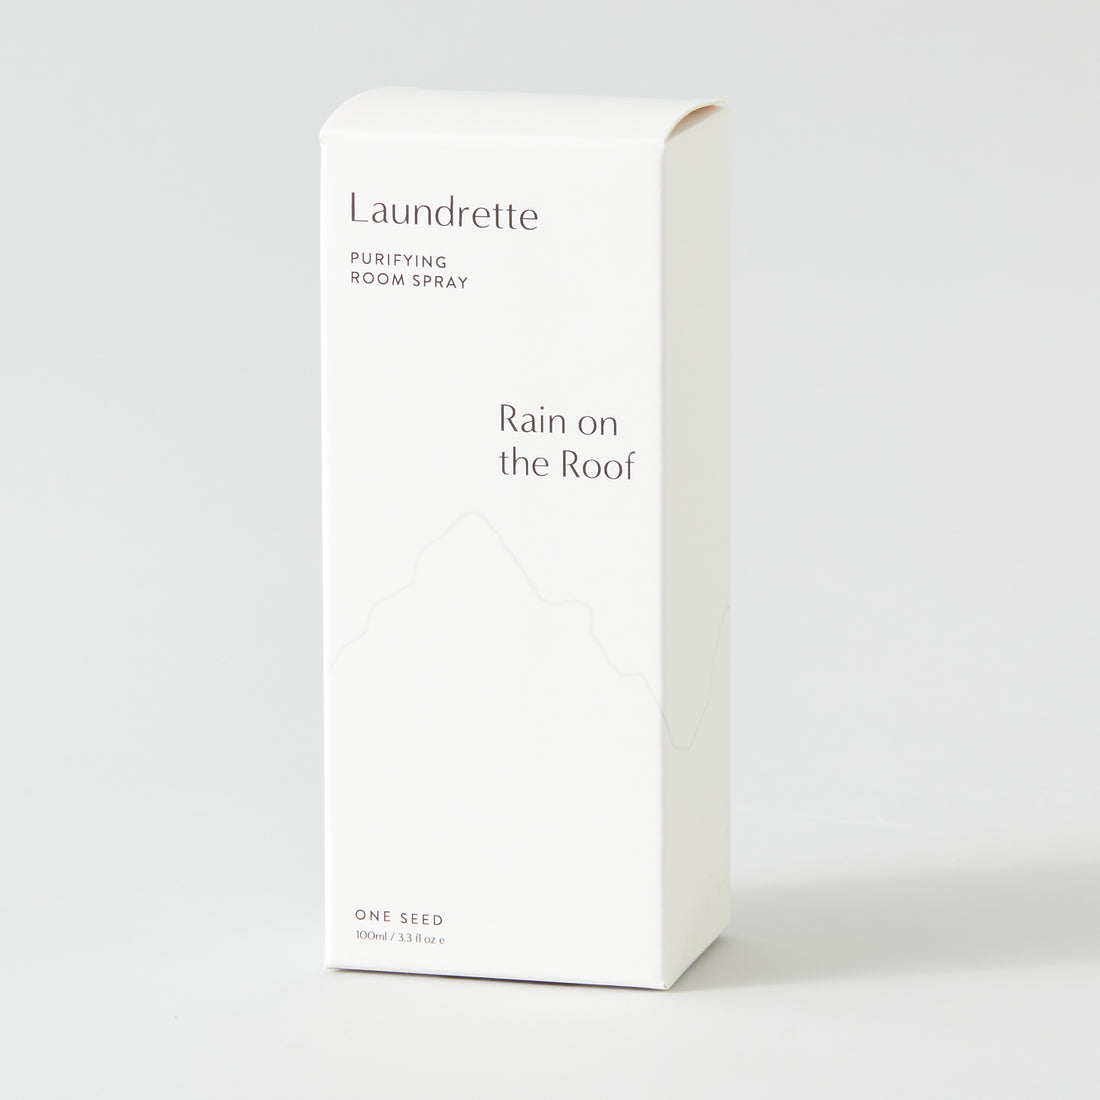 One Seed Laundrette Purifying Natural Room Spray - Rain on the Roof